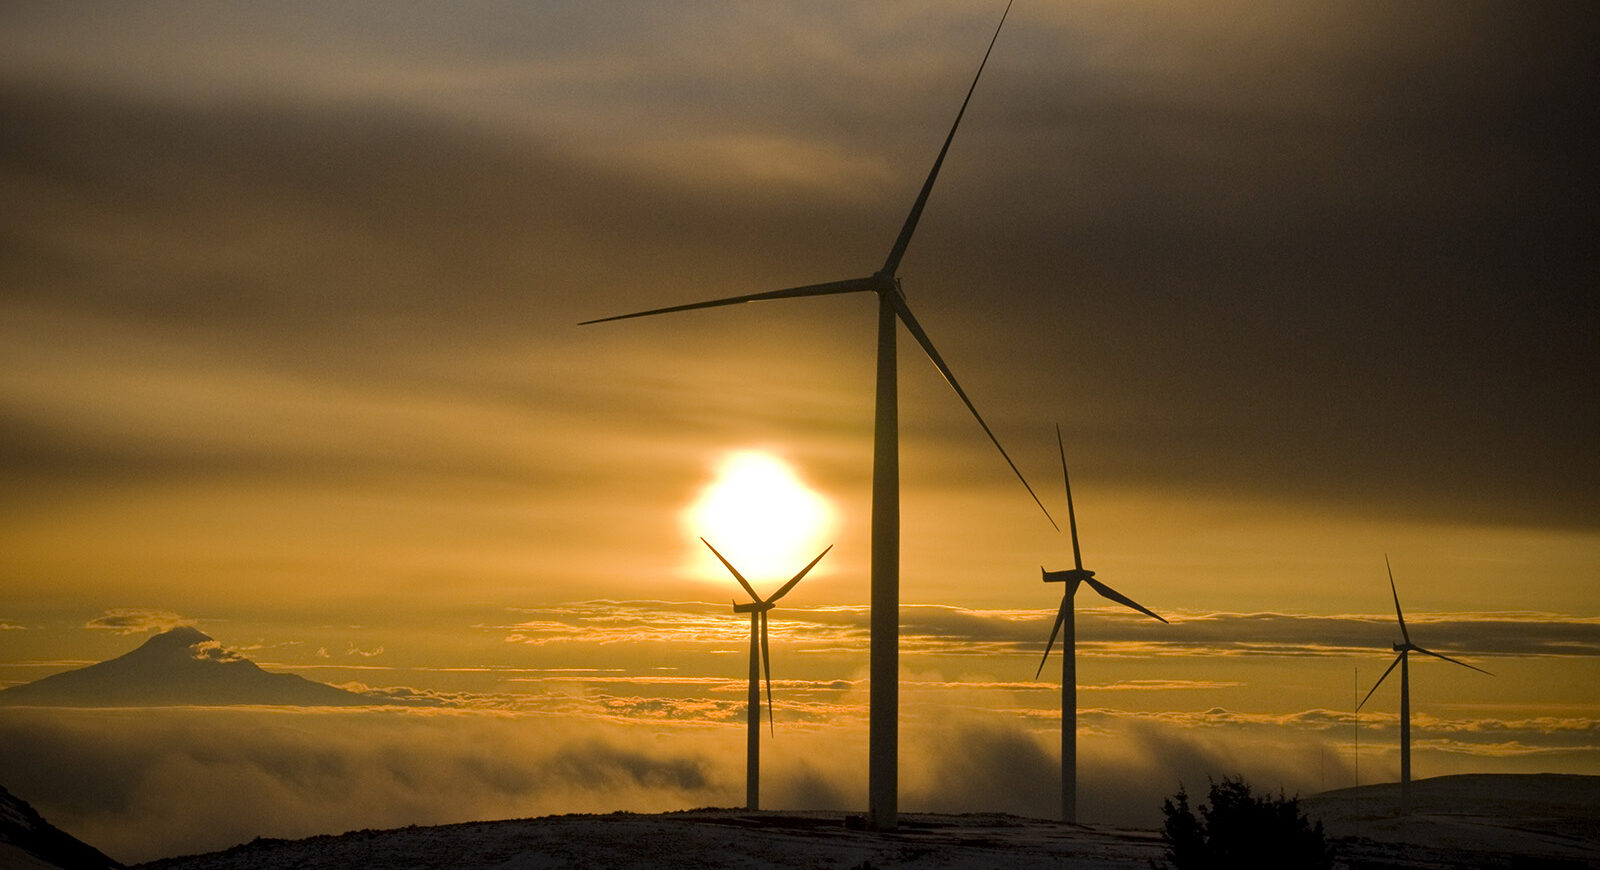 Sunset with wind turbines backlit in foreground